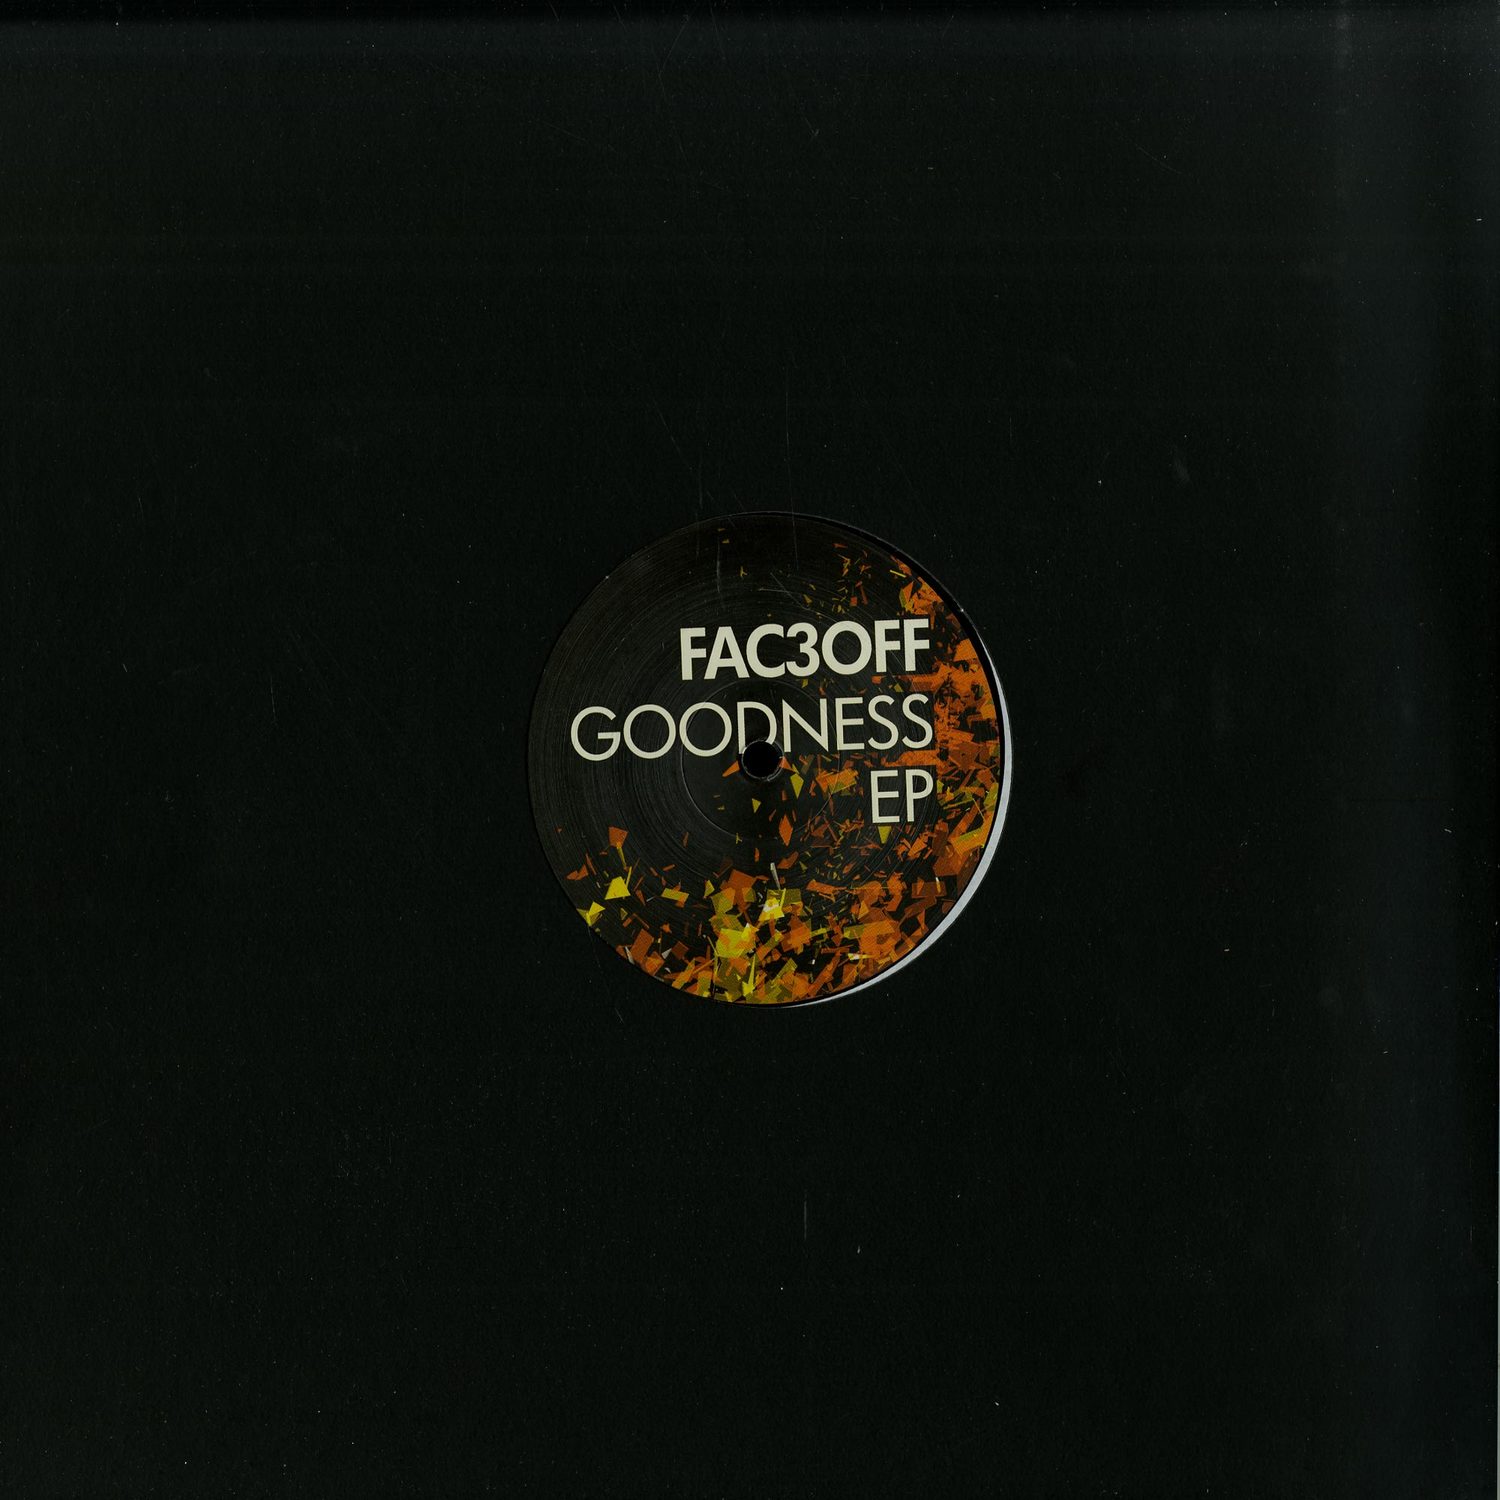 Fac3off - GOODNESS EP